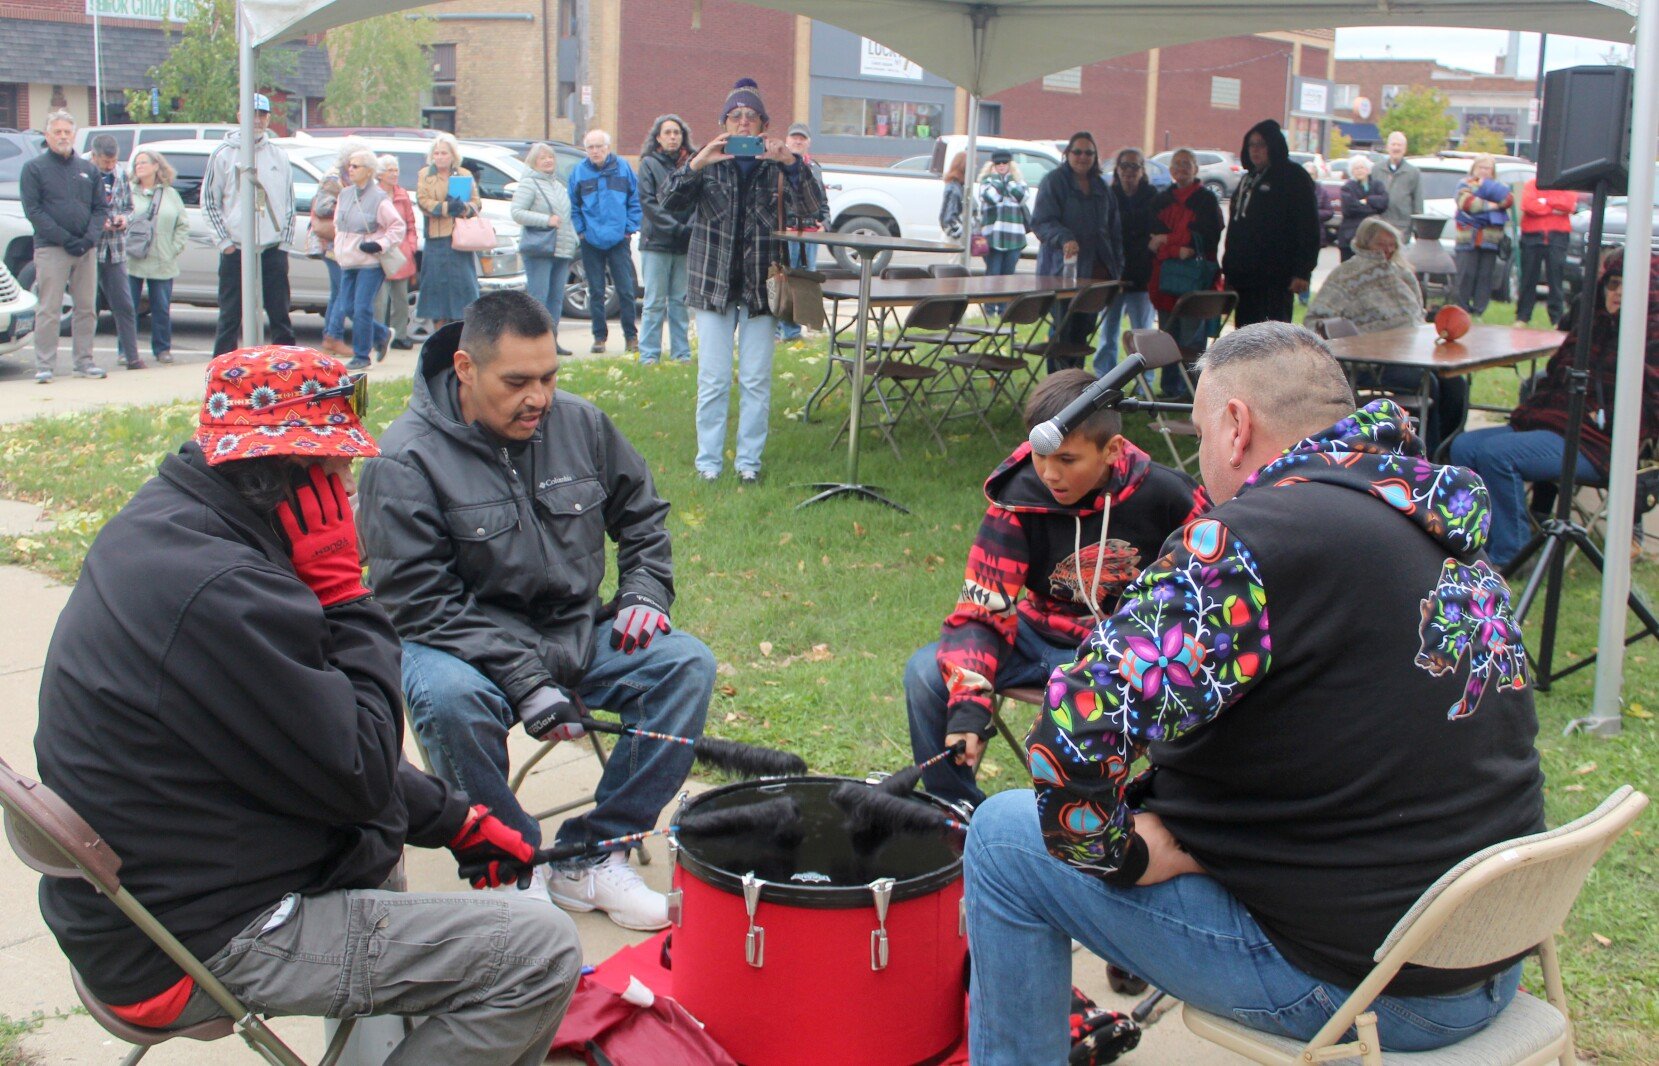  Drummers from The Four Skins – from left, Ed Miller Jr., Darryl Basswood, Justice Swiers and Ricky Smith – from the Pine Point community were part of grand opening ceremonies outside the museum.  Lorie Skarpness / Enterprise  